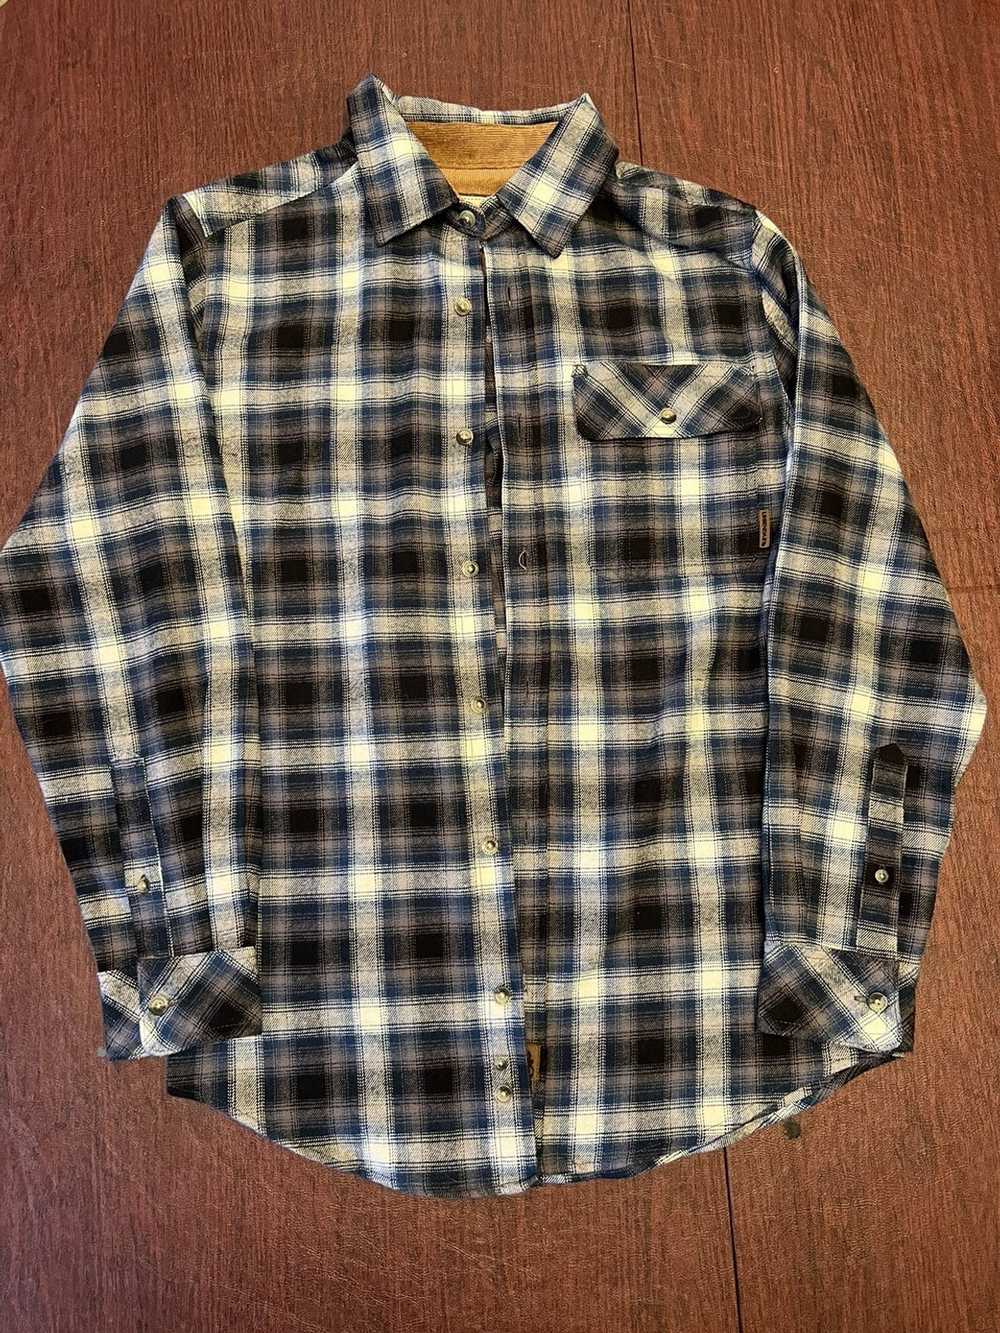 Other Legendary whitetail flannel plaid men’s sma… - image 1